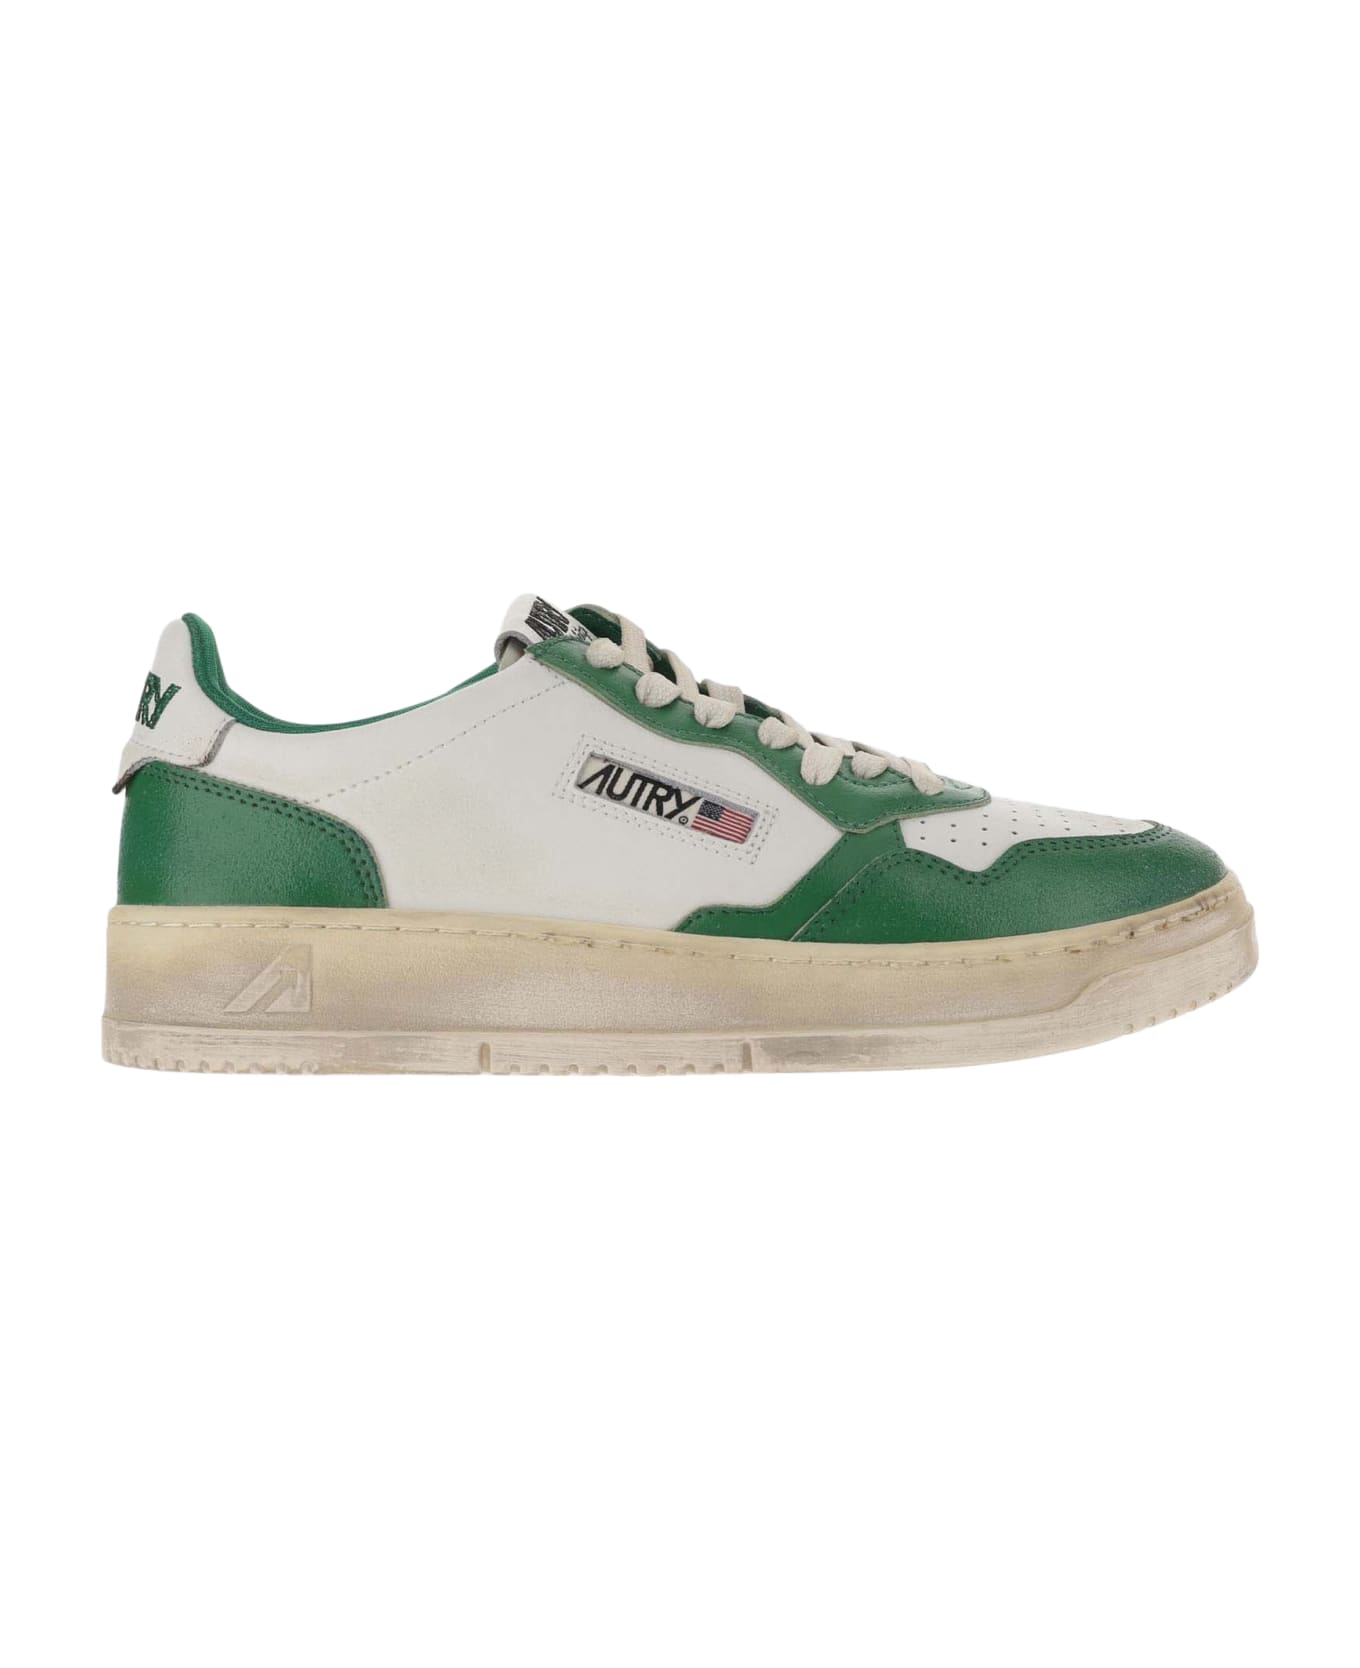 Autry Sneakers - WHT/GREEN スニーカー